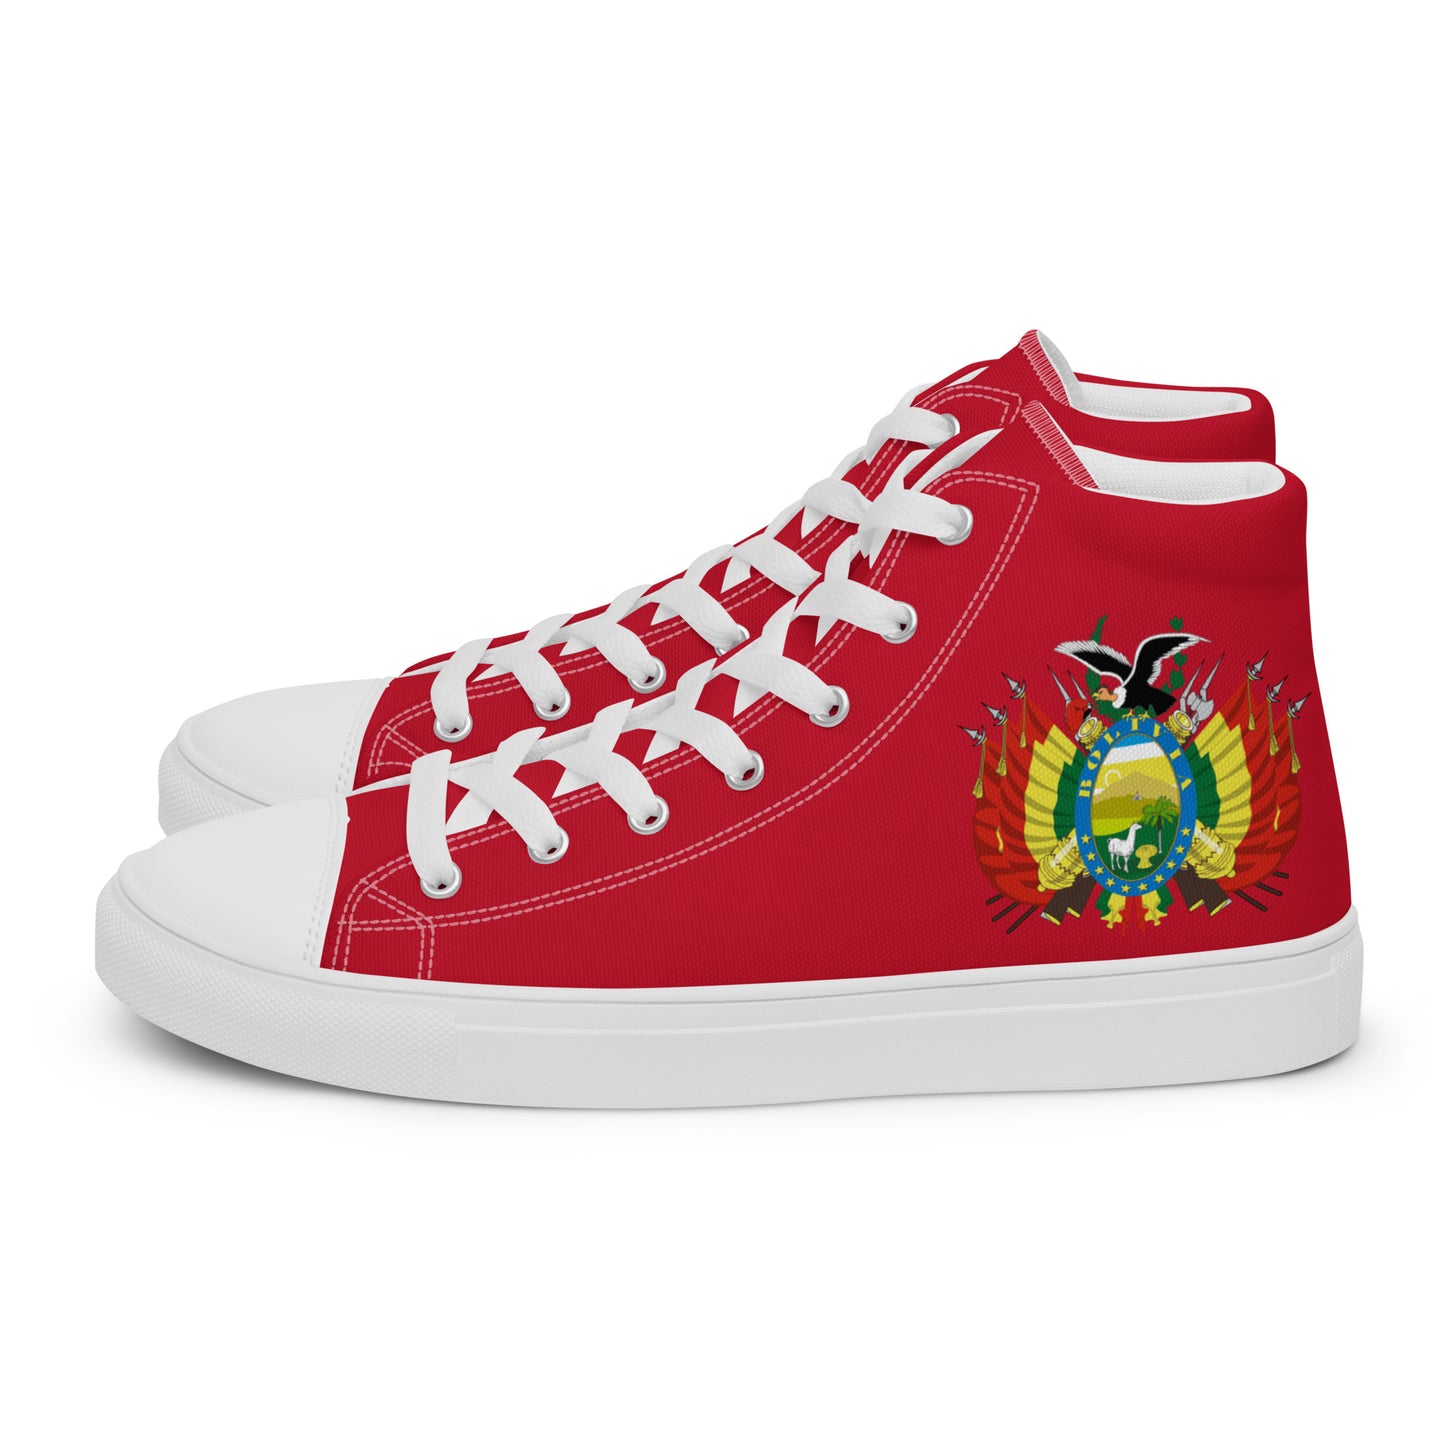 Bolivia - Women - Red - High top shoes